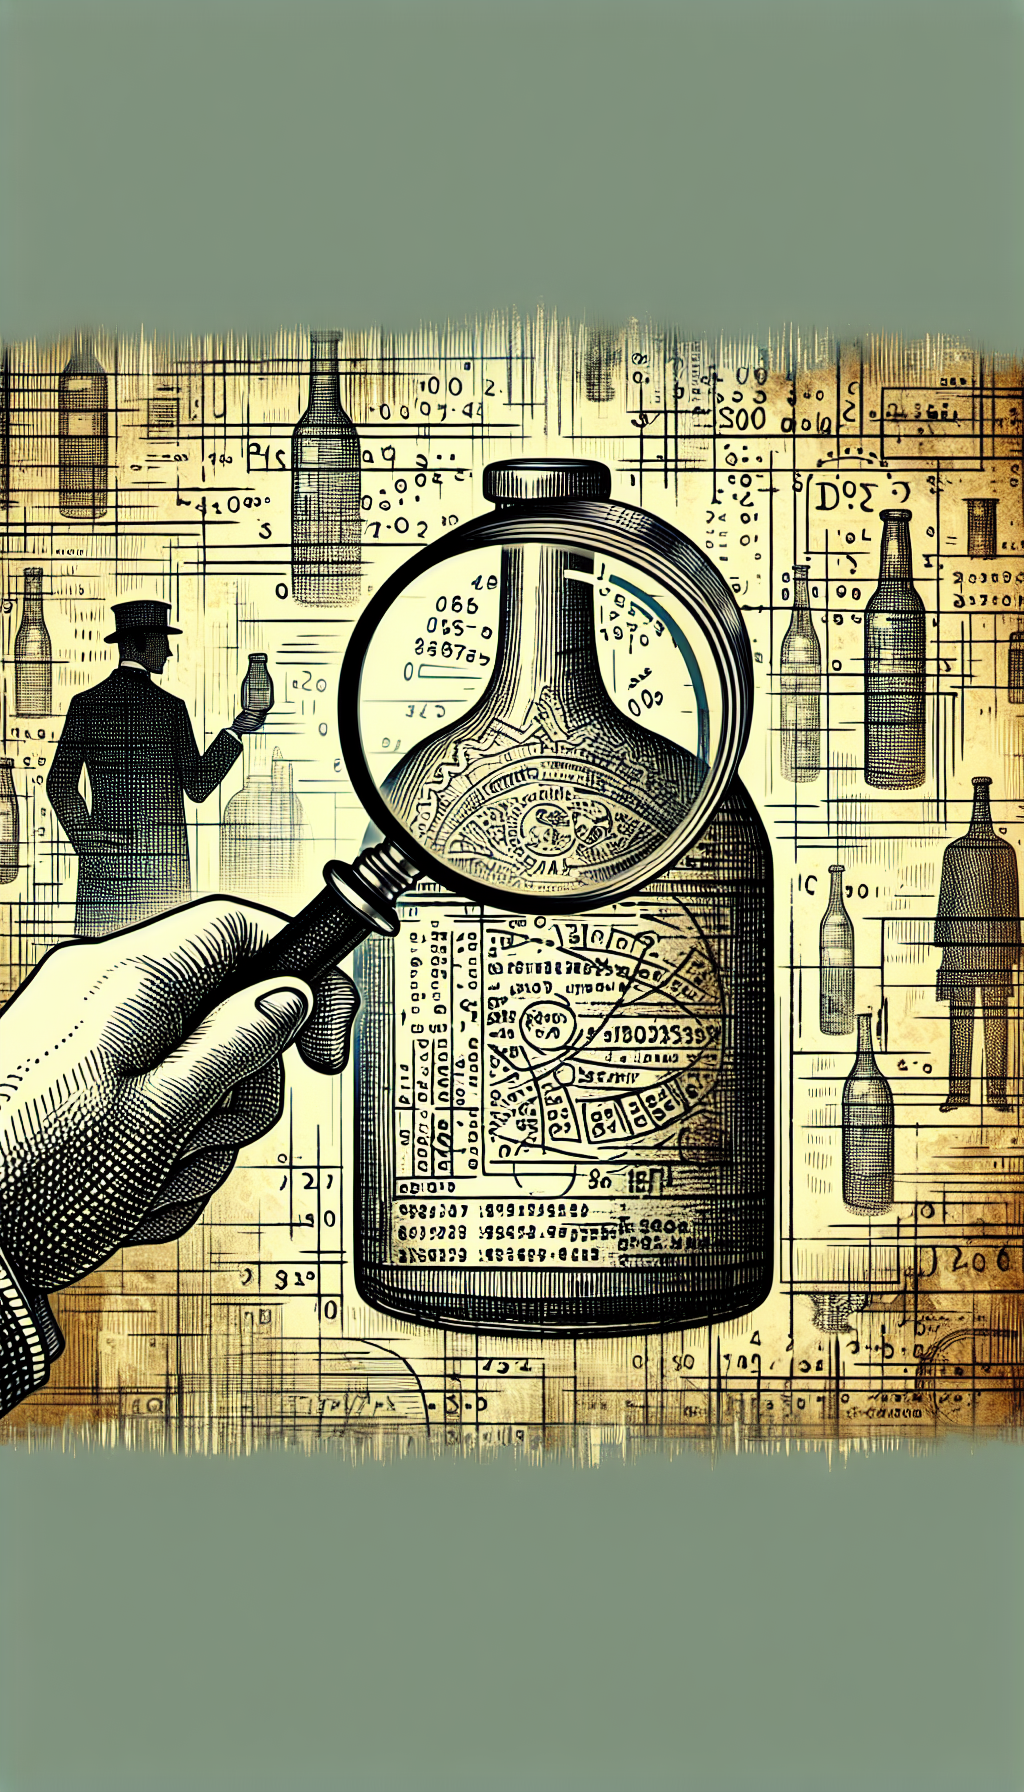 An illustration portrays a magnifying glass hovering over a fragmented Duraglas bottle label, with numbers and dates etched alongside decipherable codes. Around it, ghostly figures of antique bottles fade in and out, representing rarity and age. The artwork merges vintage engravings with sleek, digital lines, symbolically unifying past and present Duraglas identification techniques.